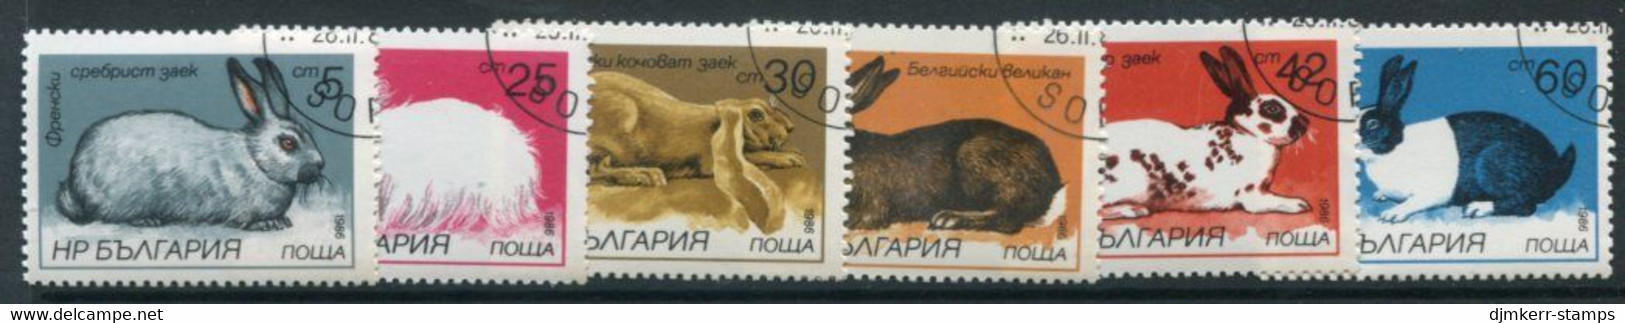 BULGARIA 1986 Rabbits Perforated  Used.  Michel 3447-52A - Usados